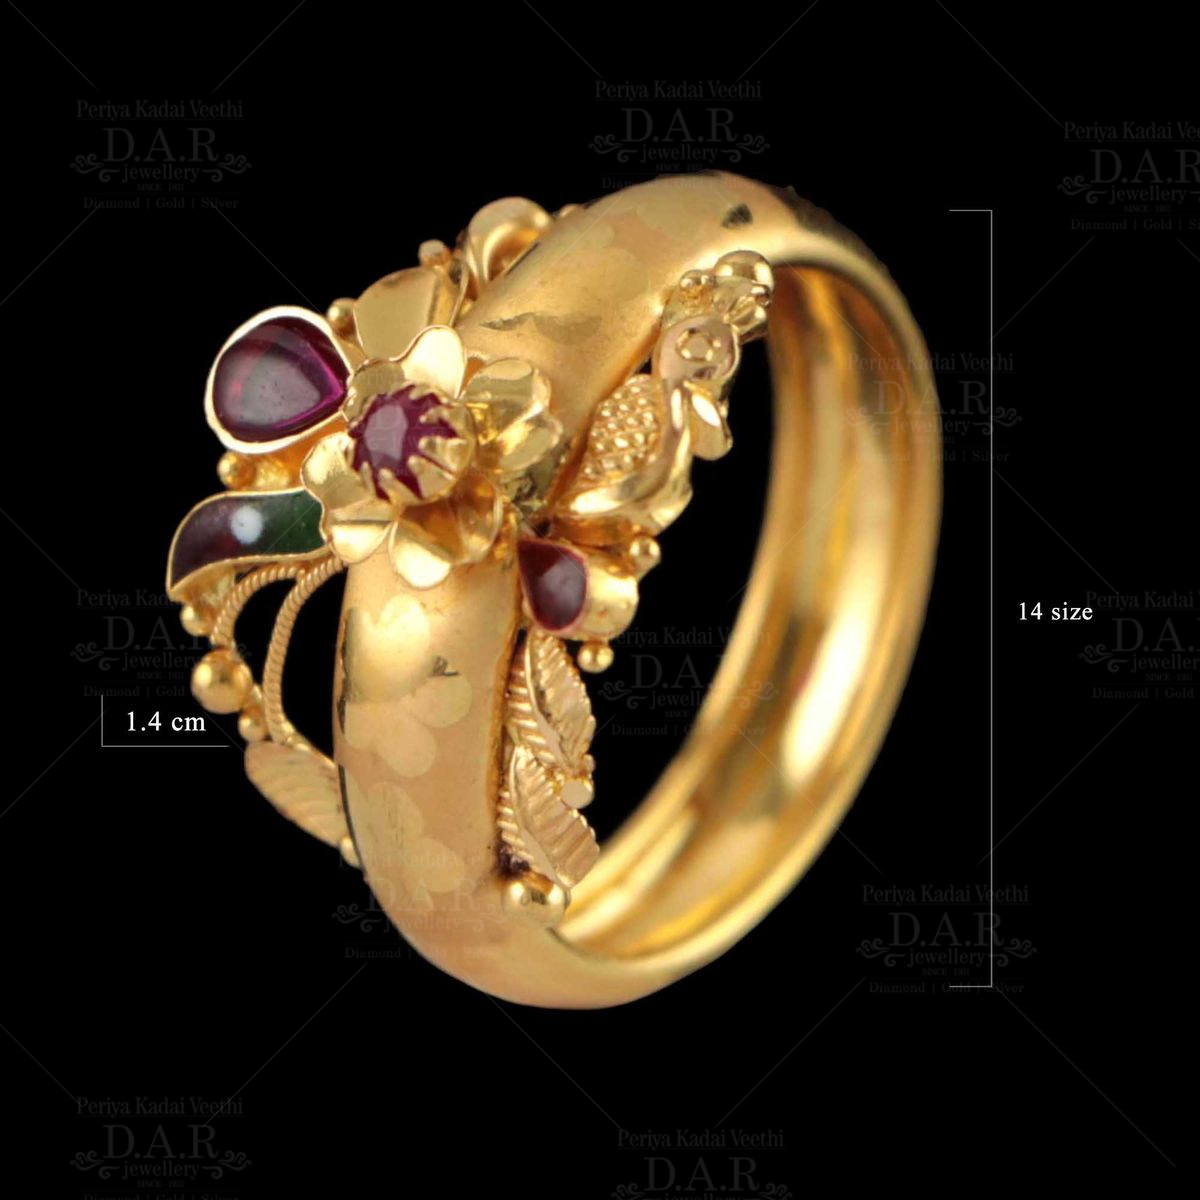 Gold Rings Designs For Women | Gold Jewelry Simple | Gold Rings Jewelry |  Gemstone Jewelr… | Gold jewellery design necklaces, Gold ring designs, Gold  jewelry simple